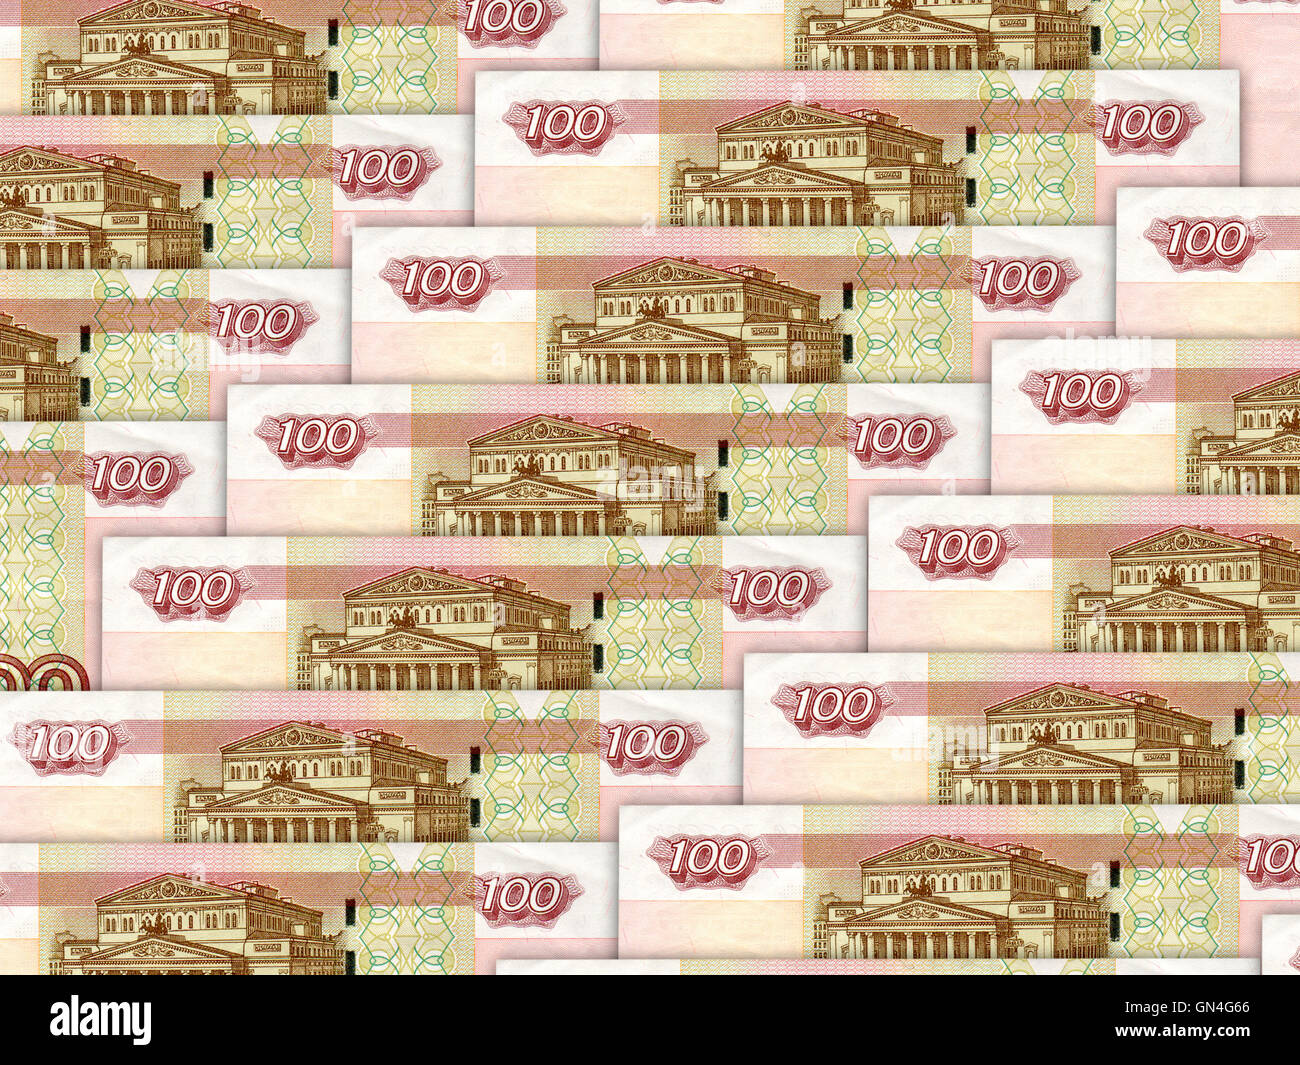 Background of money pile 100 russian rouble bills Stock Photo